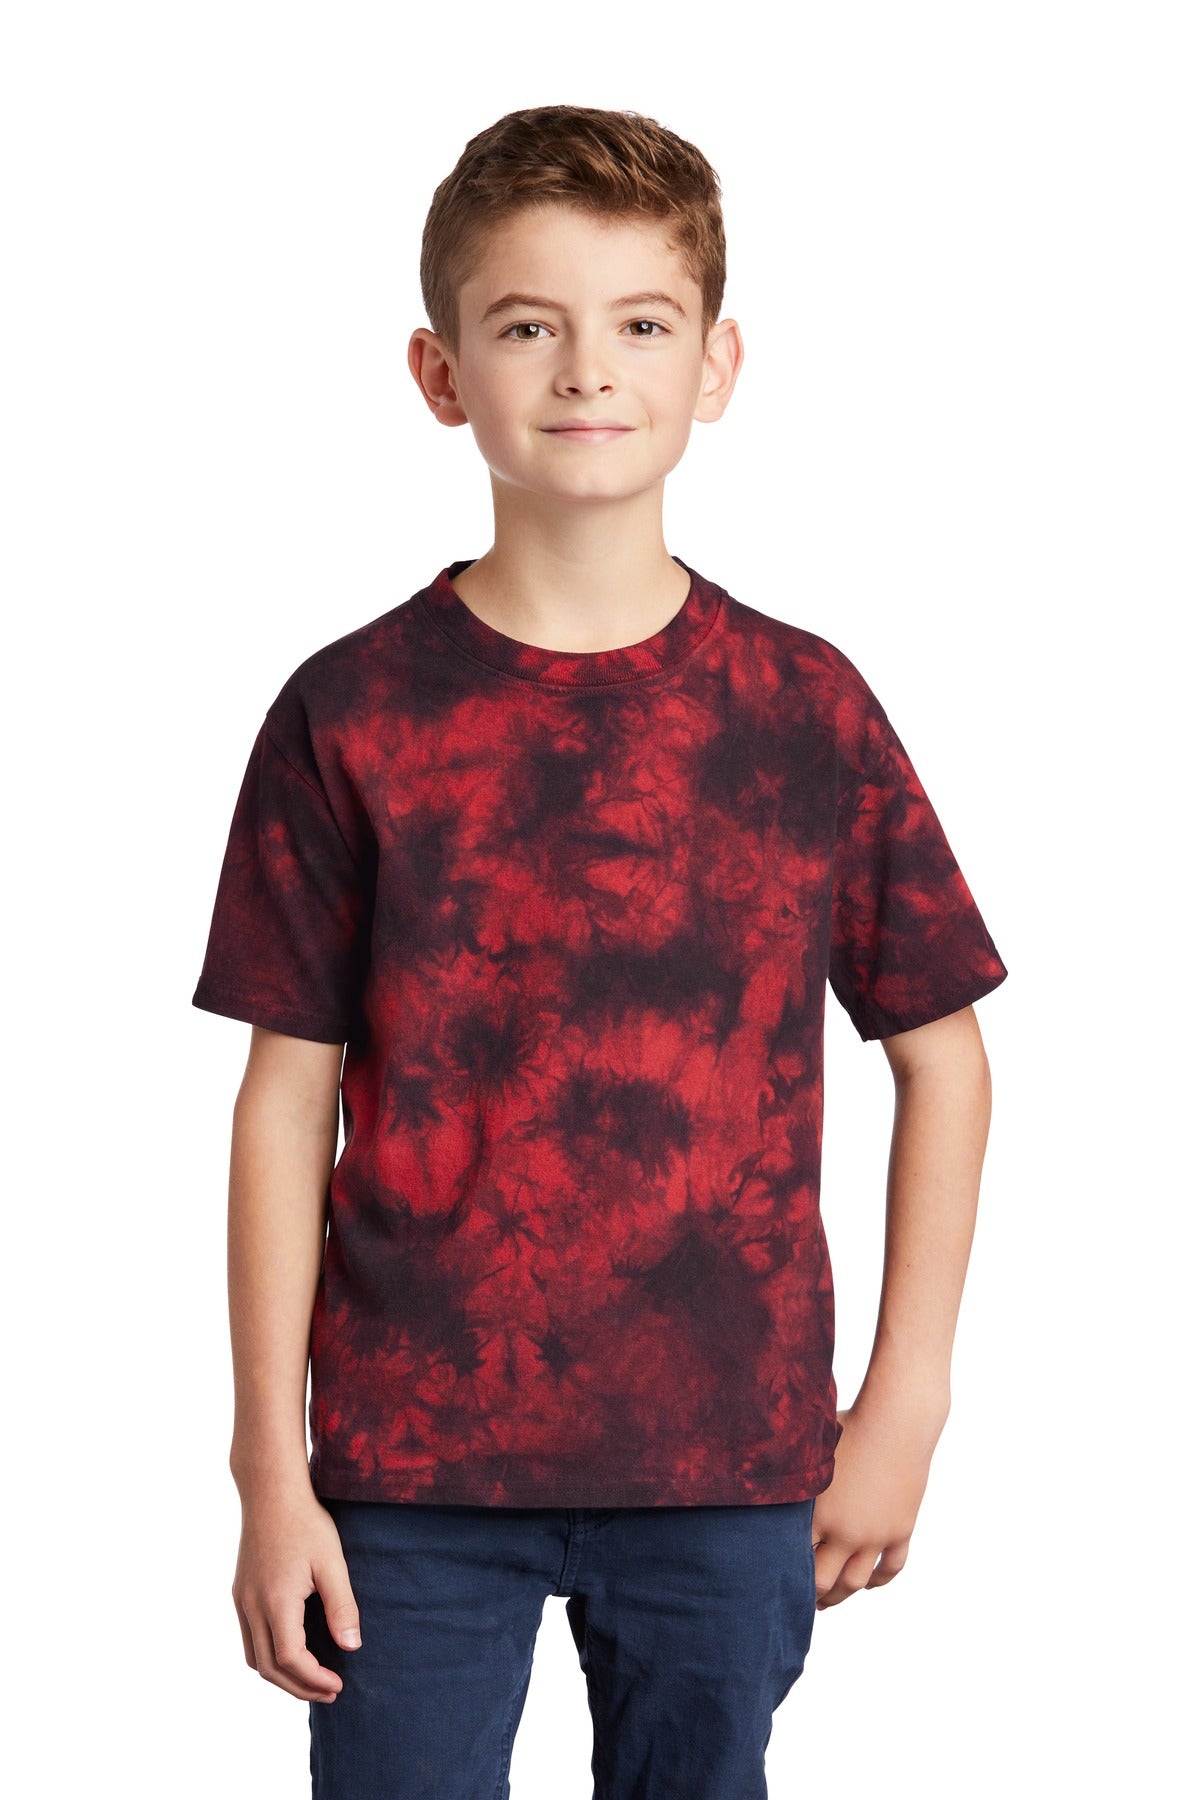 Port &amp; Company ® Youth Crystal Tie-Dye Tee PC145Y